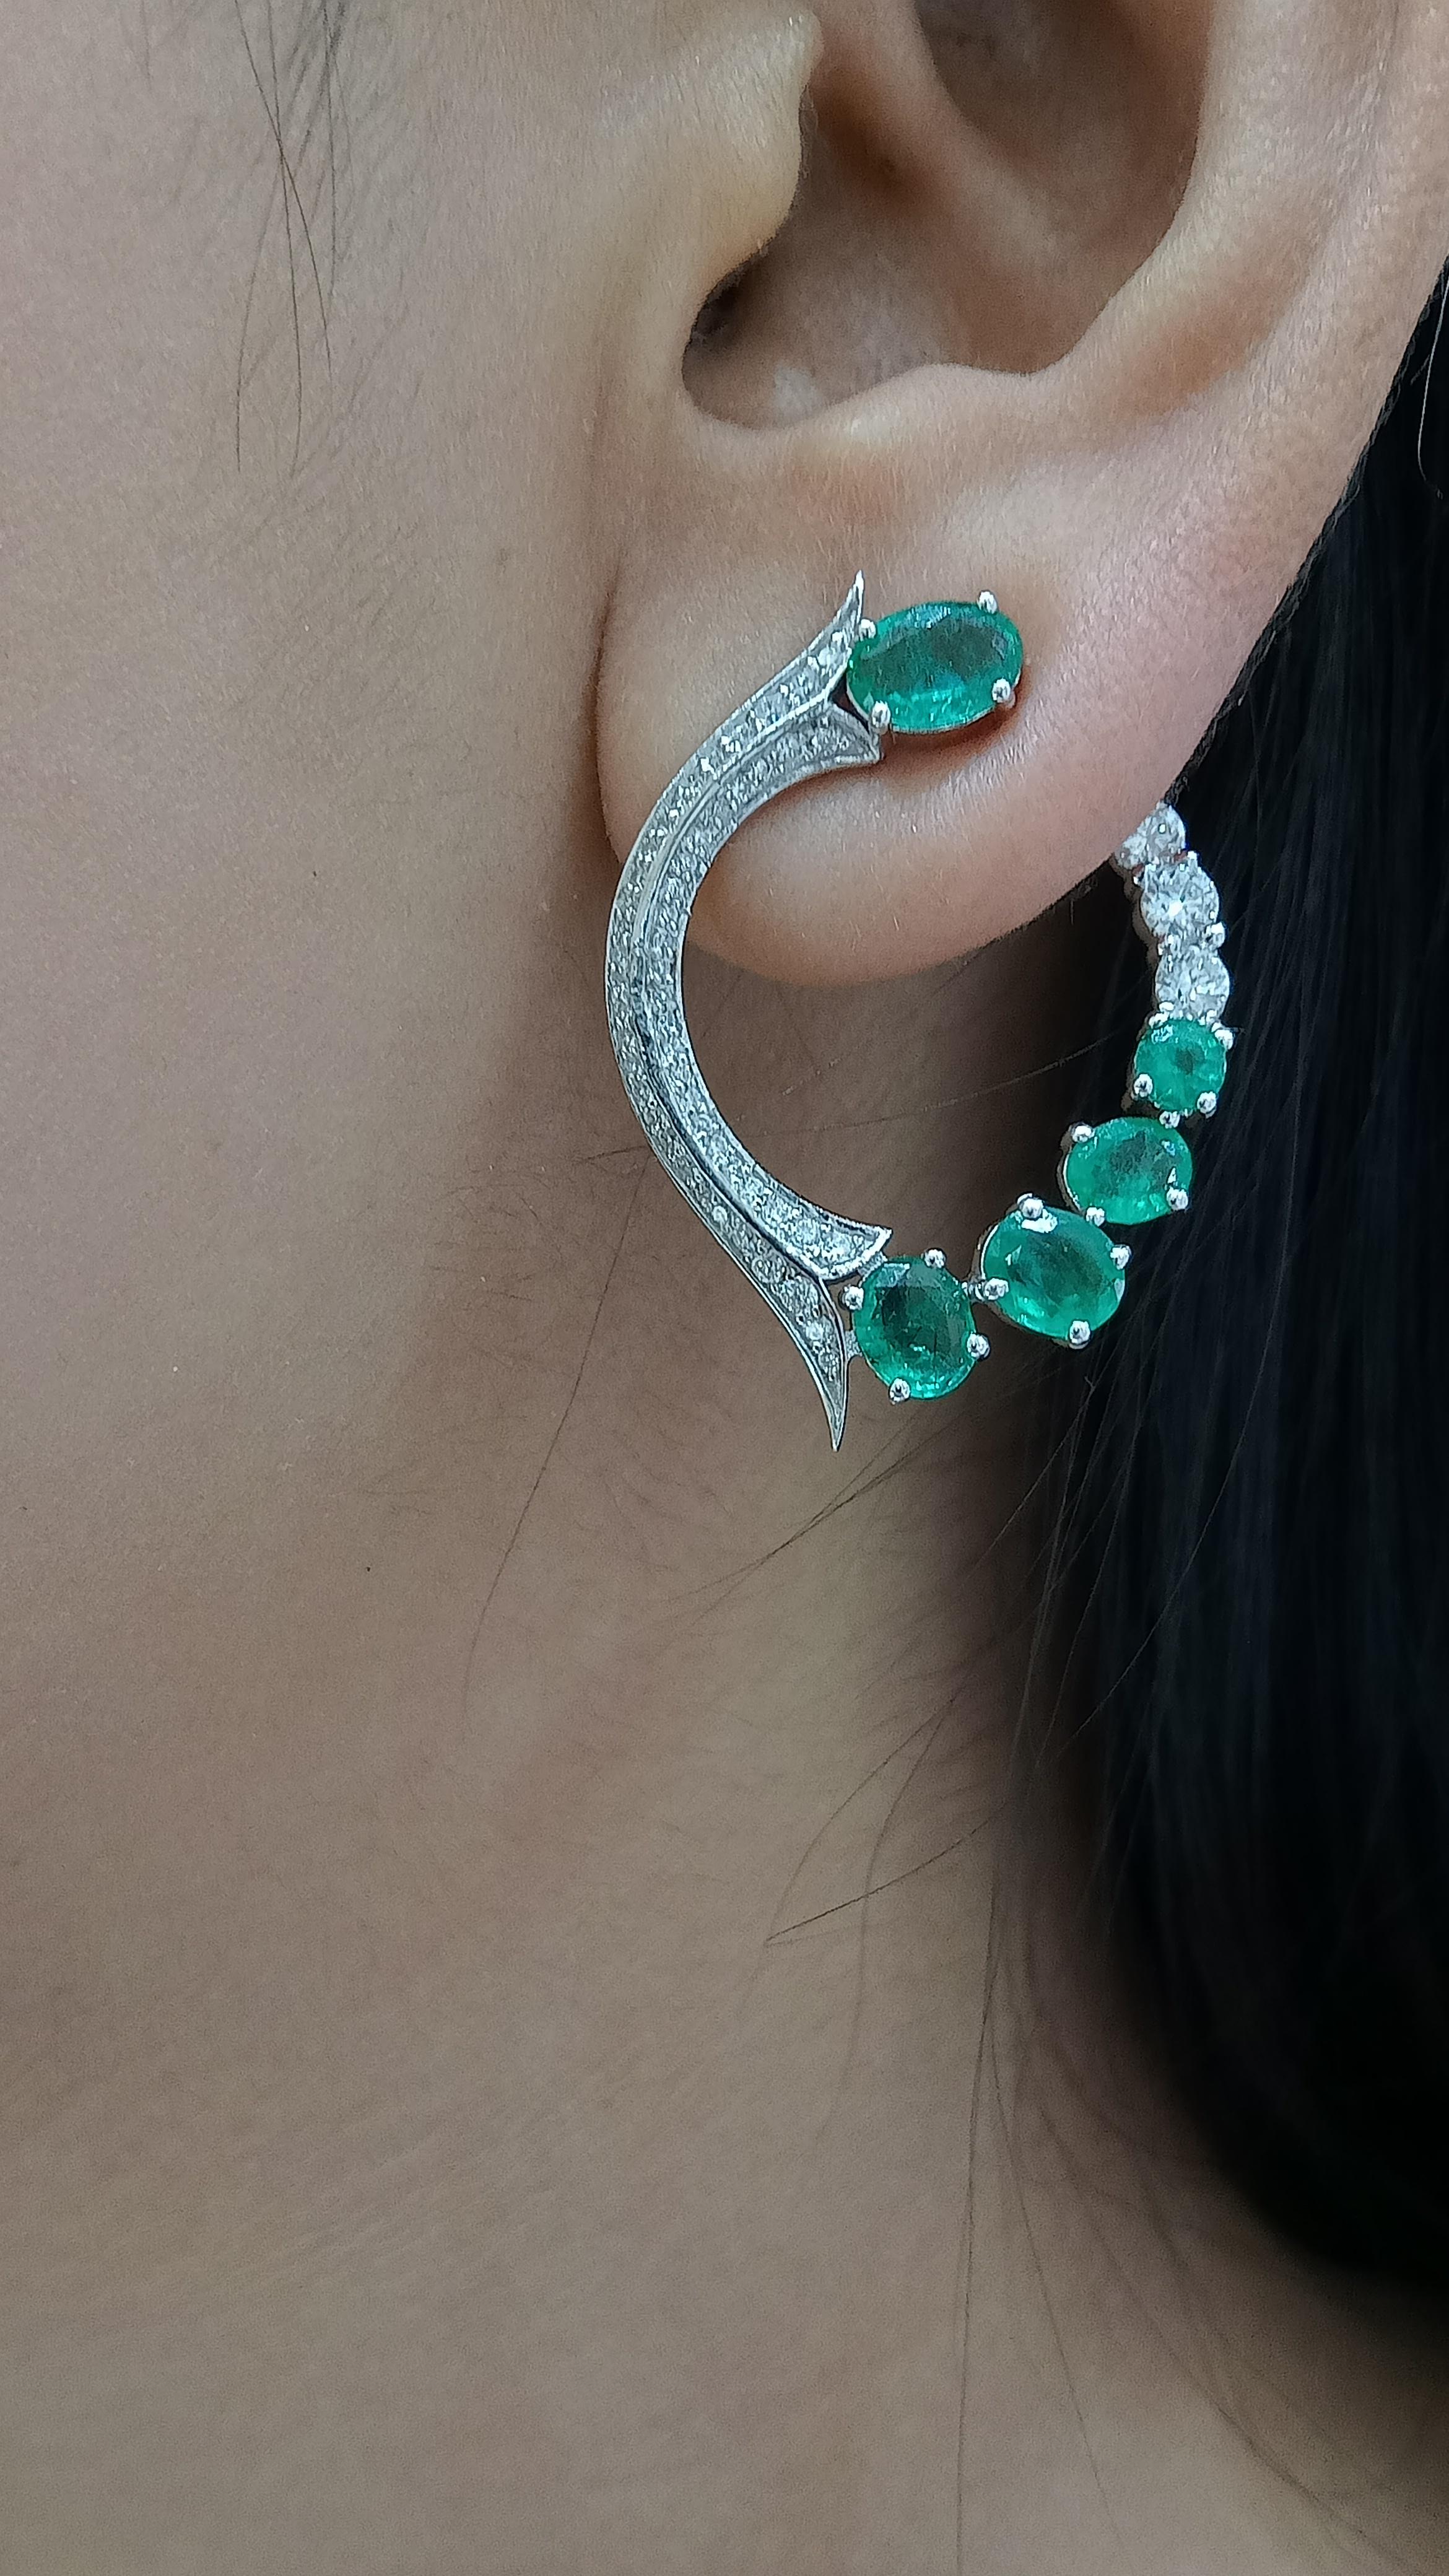 It,s time to try on a new pair of Earrings.

Gold Weight-8.278gms
Diamond Weight-1.12 carats
Emerald Weight-2.80 carats